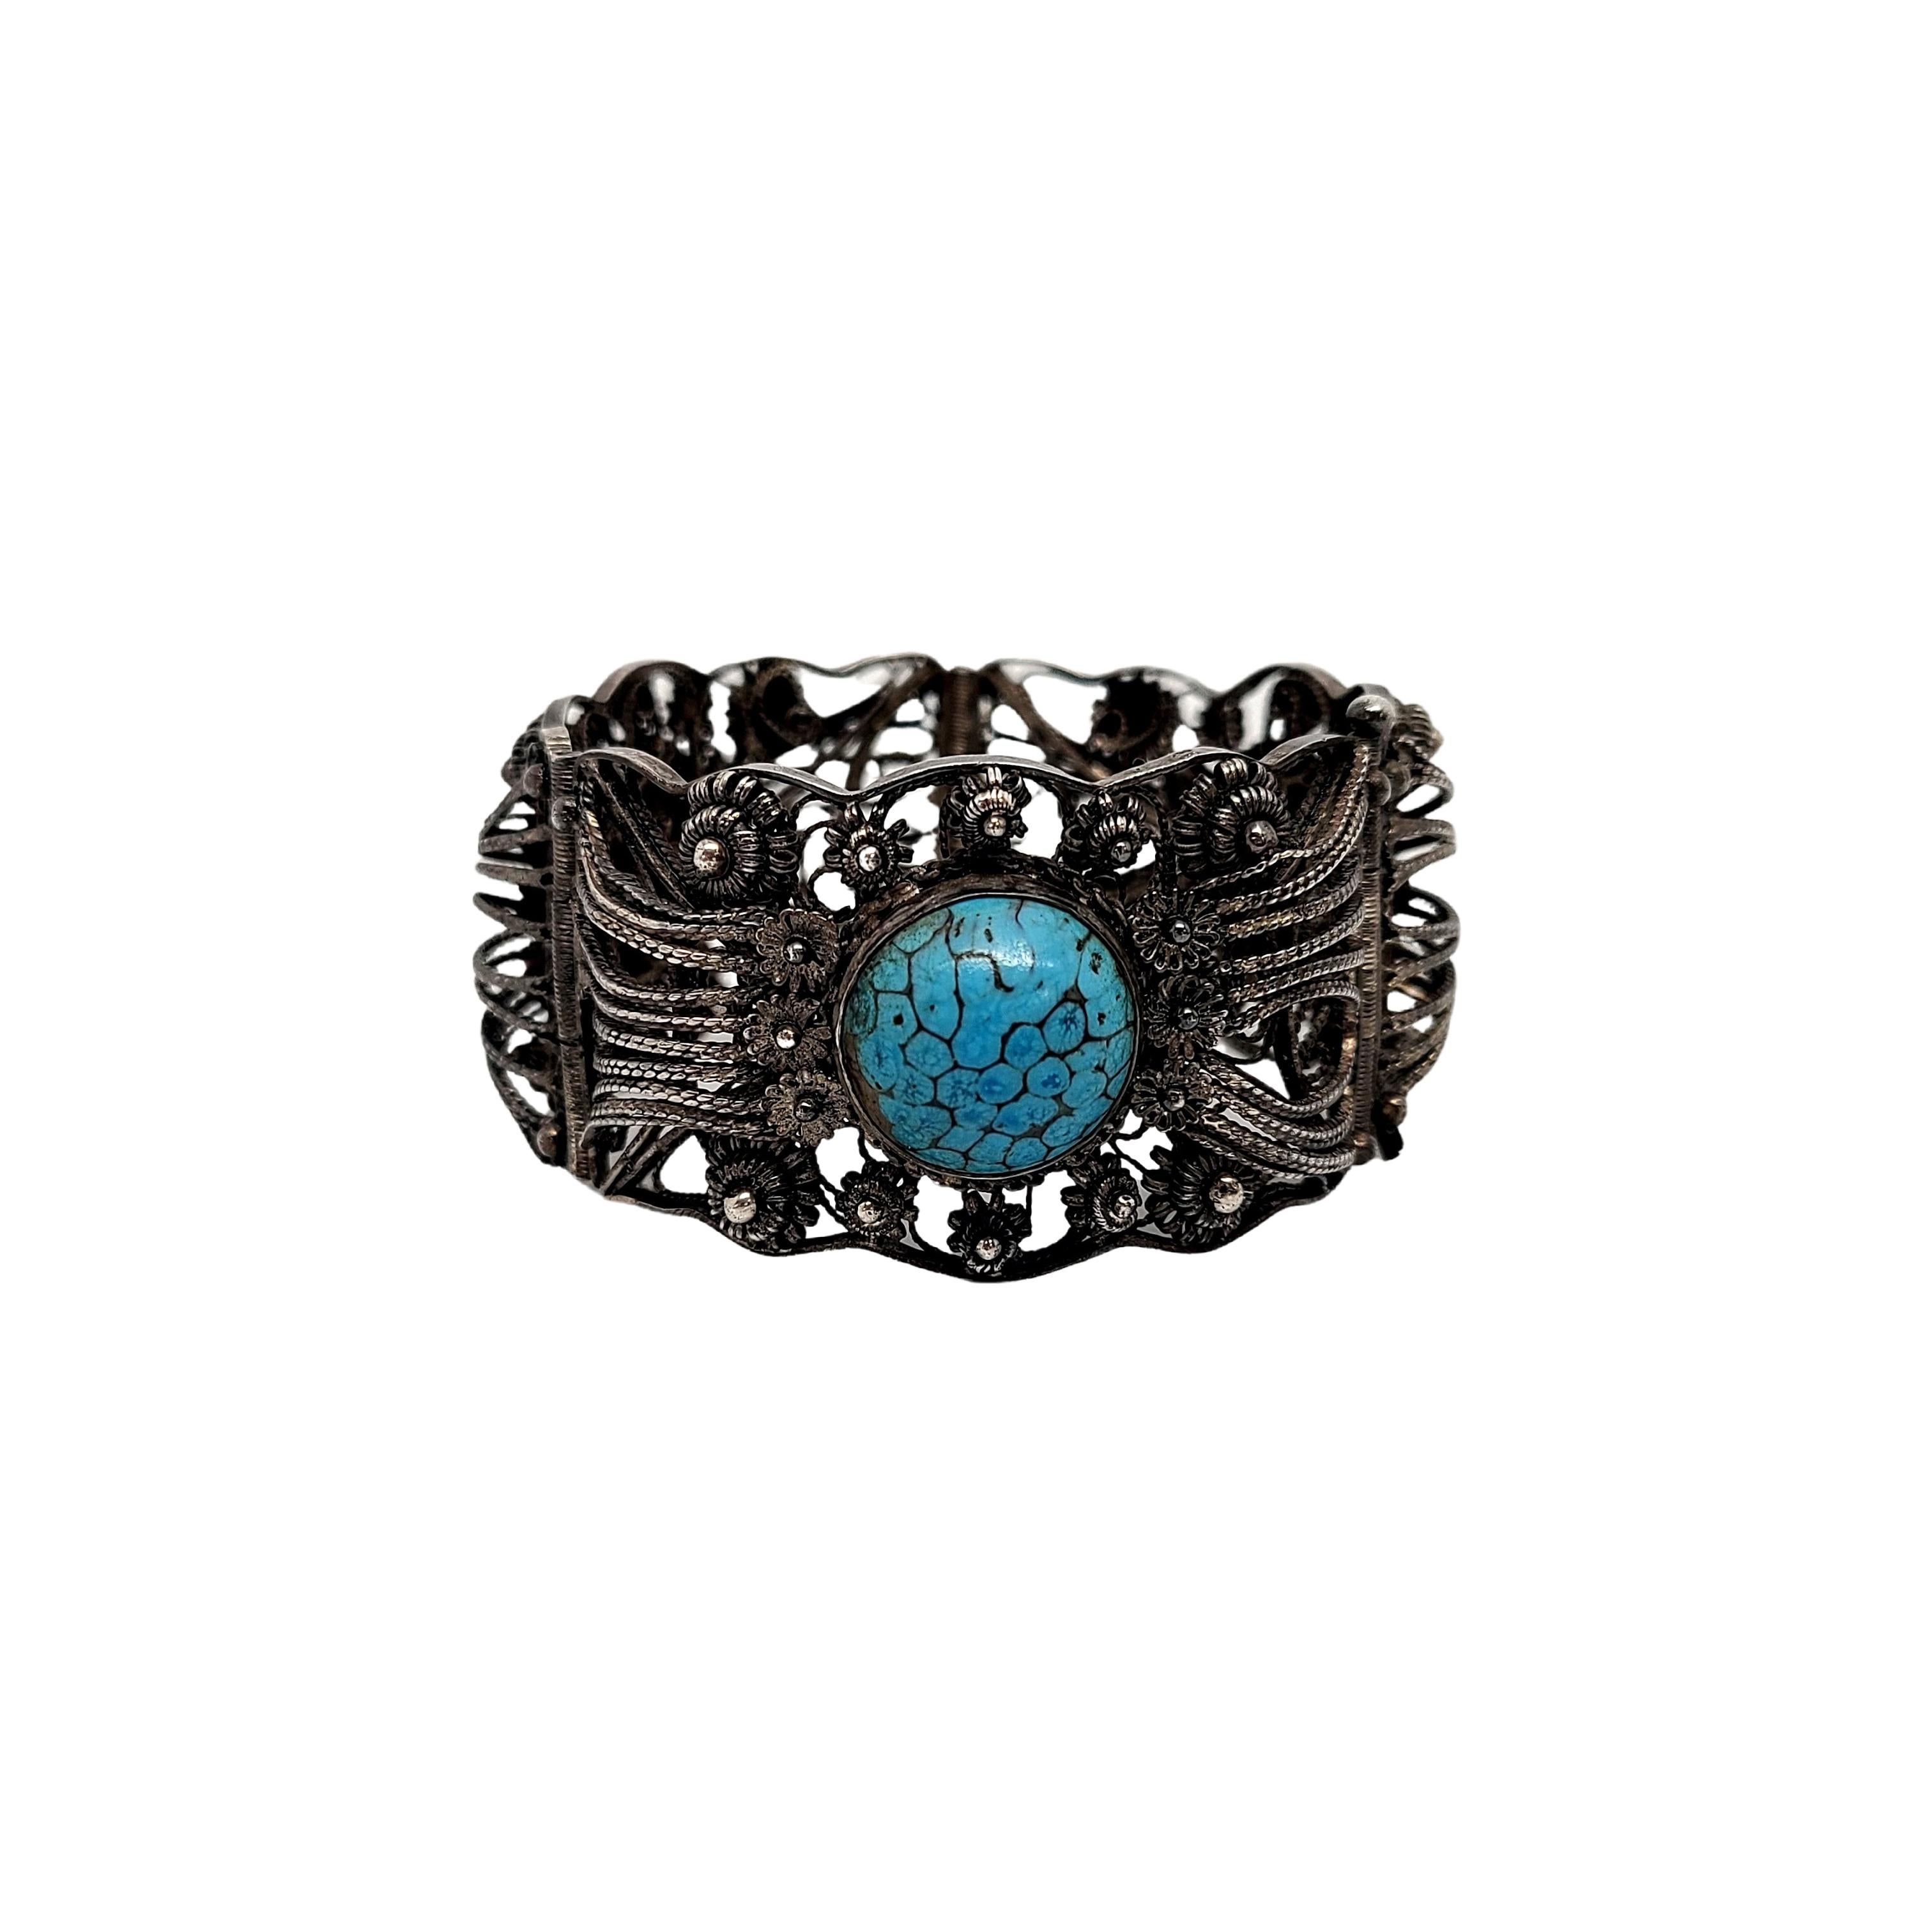 900 silver filigree and turquoise panel bracelet.

3 panel bracelet featuring intricate filigree design and a round turquoise stone with blue and gray veining bezel set at the center of each panel. Pull pin closure.

Measures approx 7